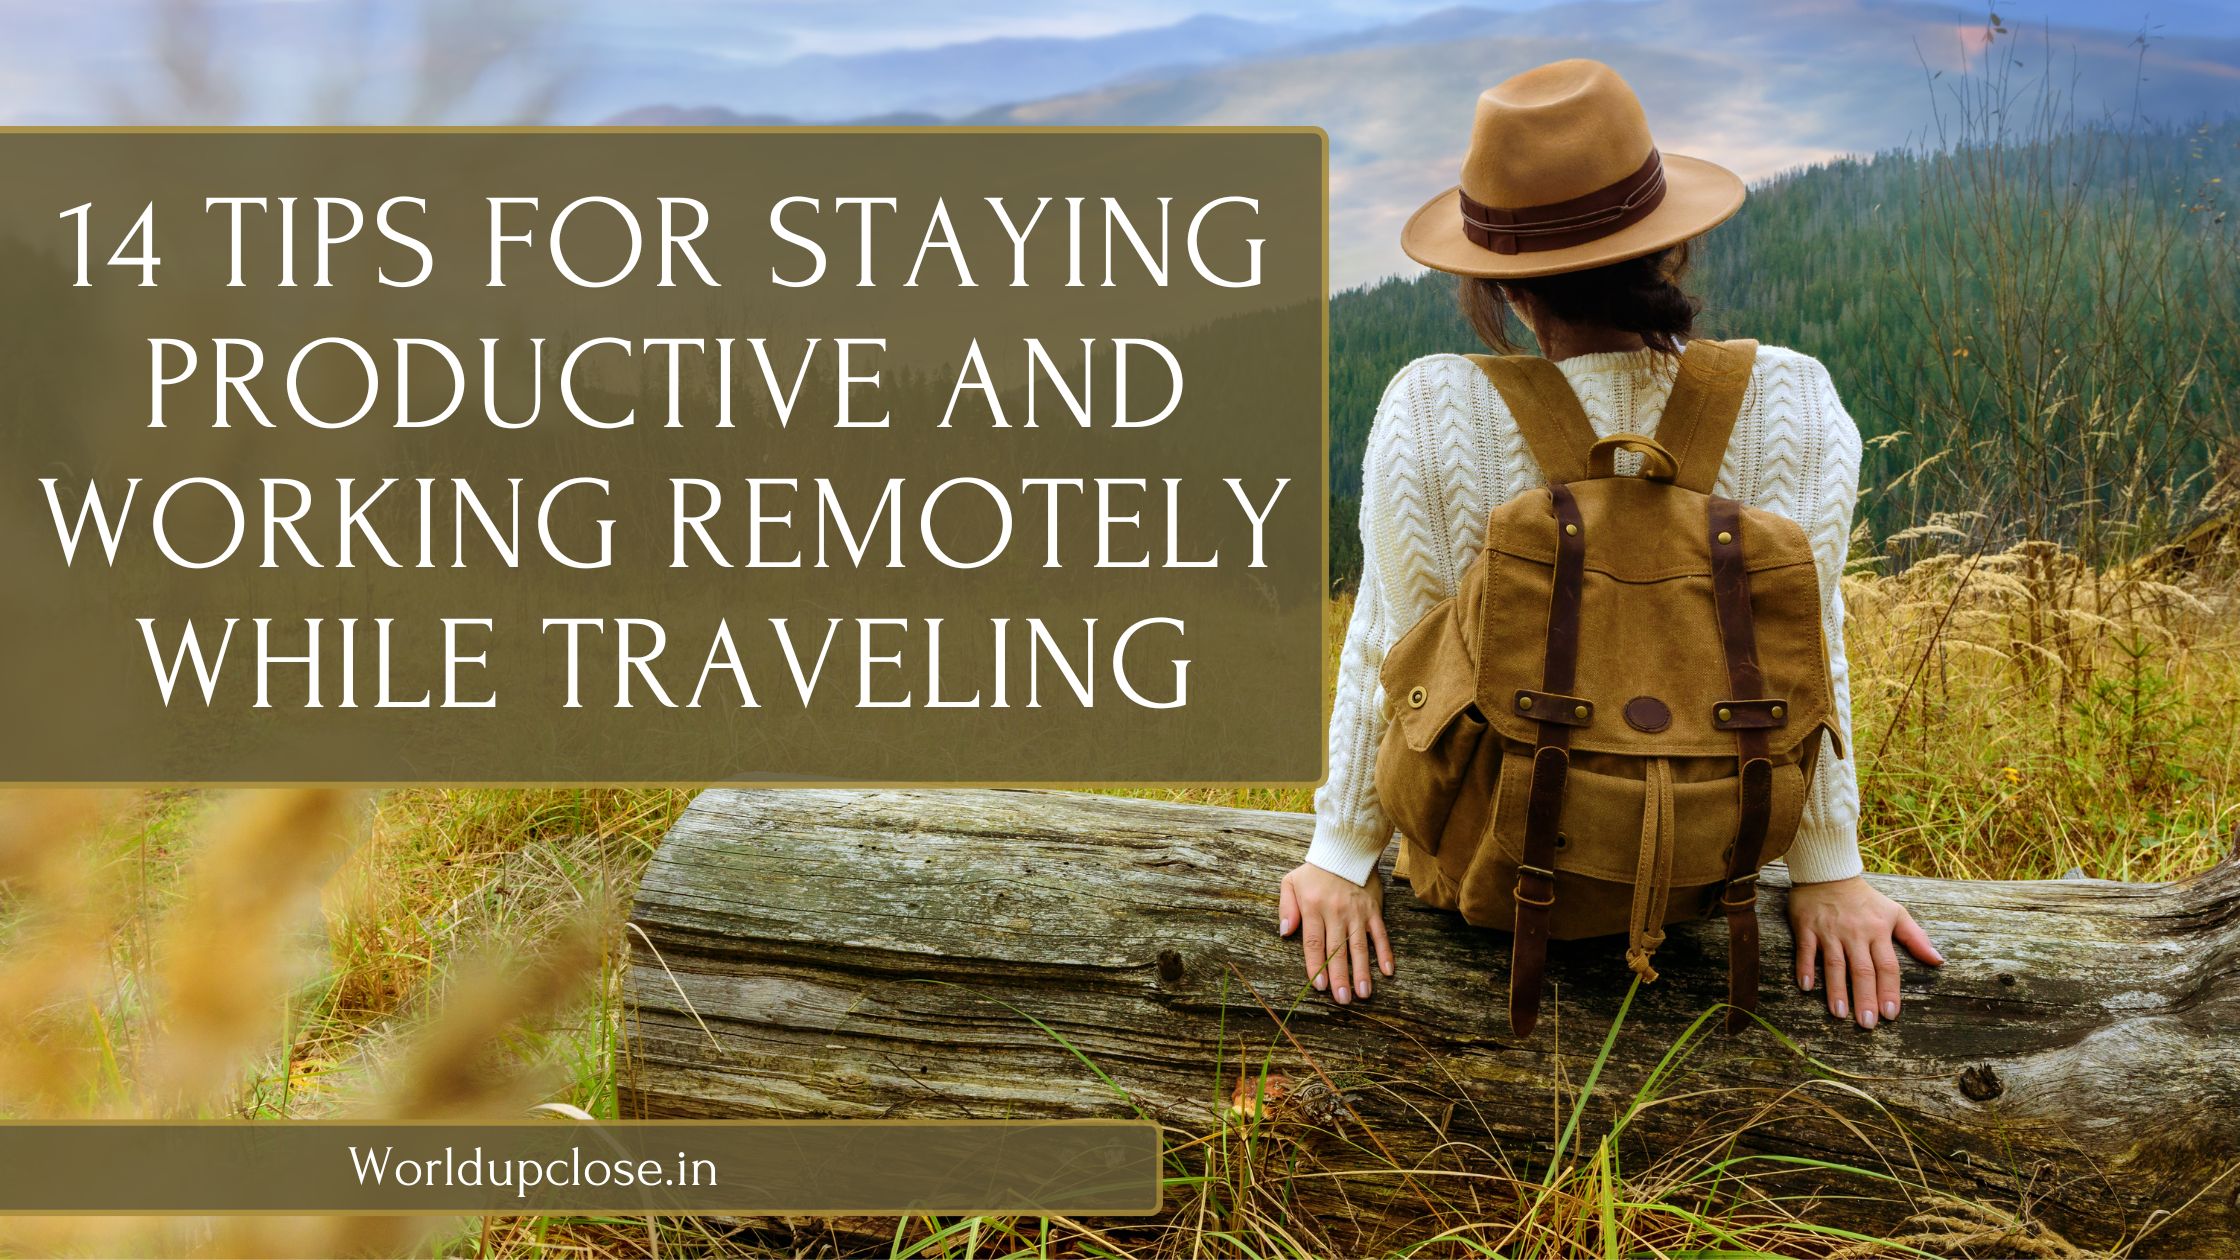 14 Tips for staying productive and working remotely while traveling 3